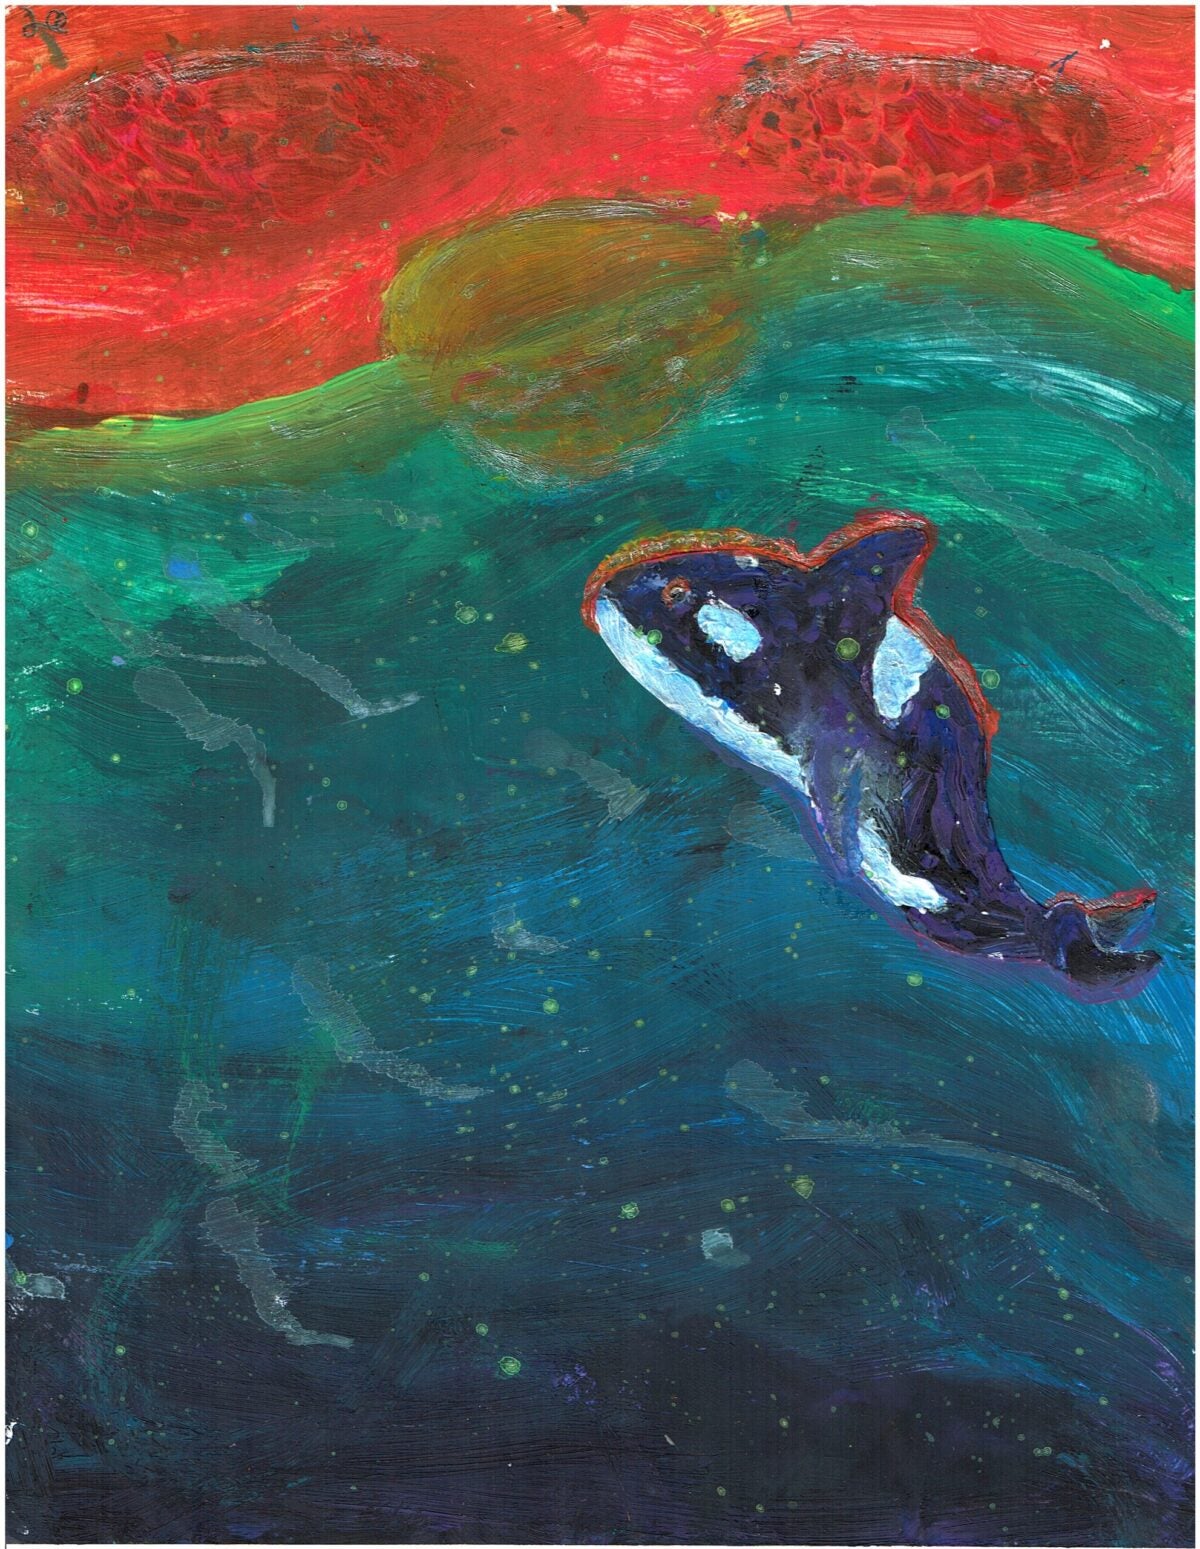 Rainbow painting of orca whale swimming